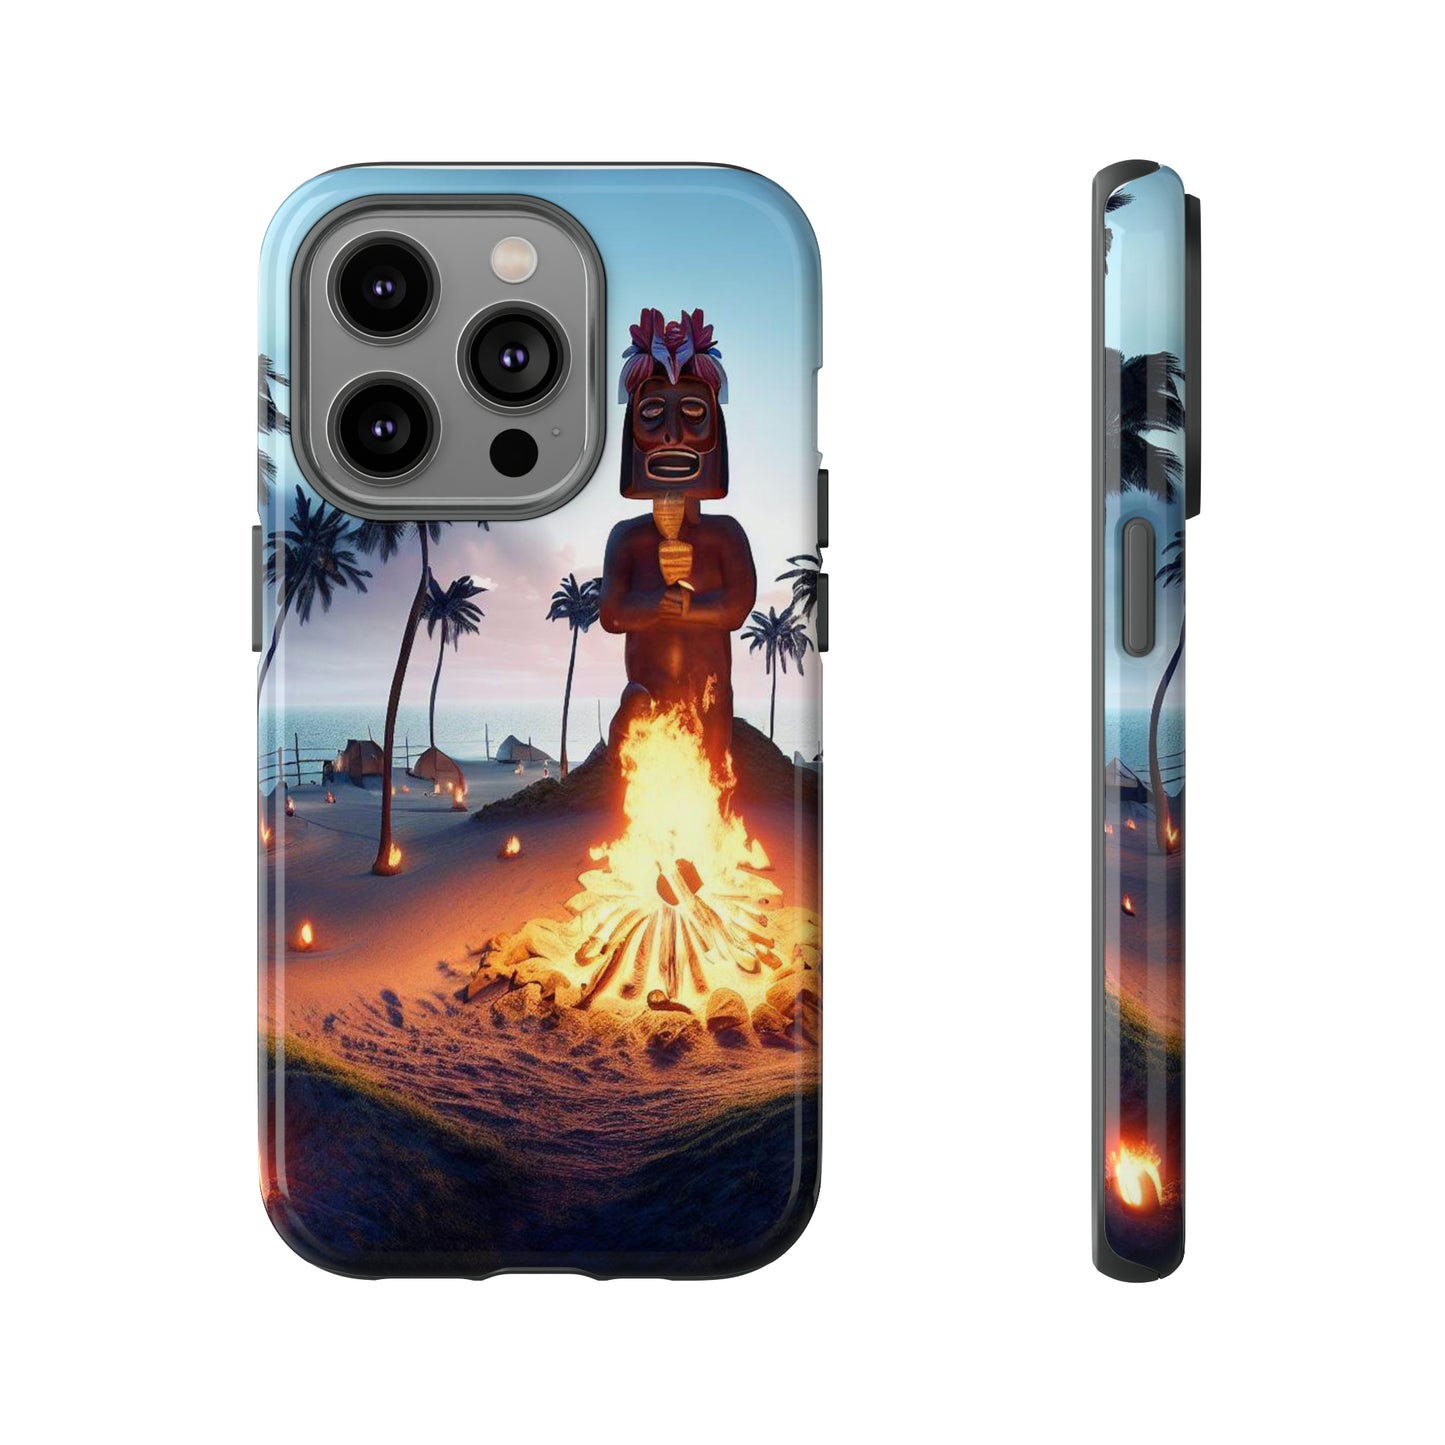 Tough Tiki Phone Case for Android and Iphone